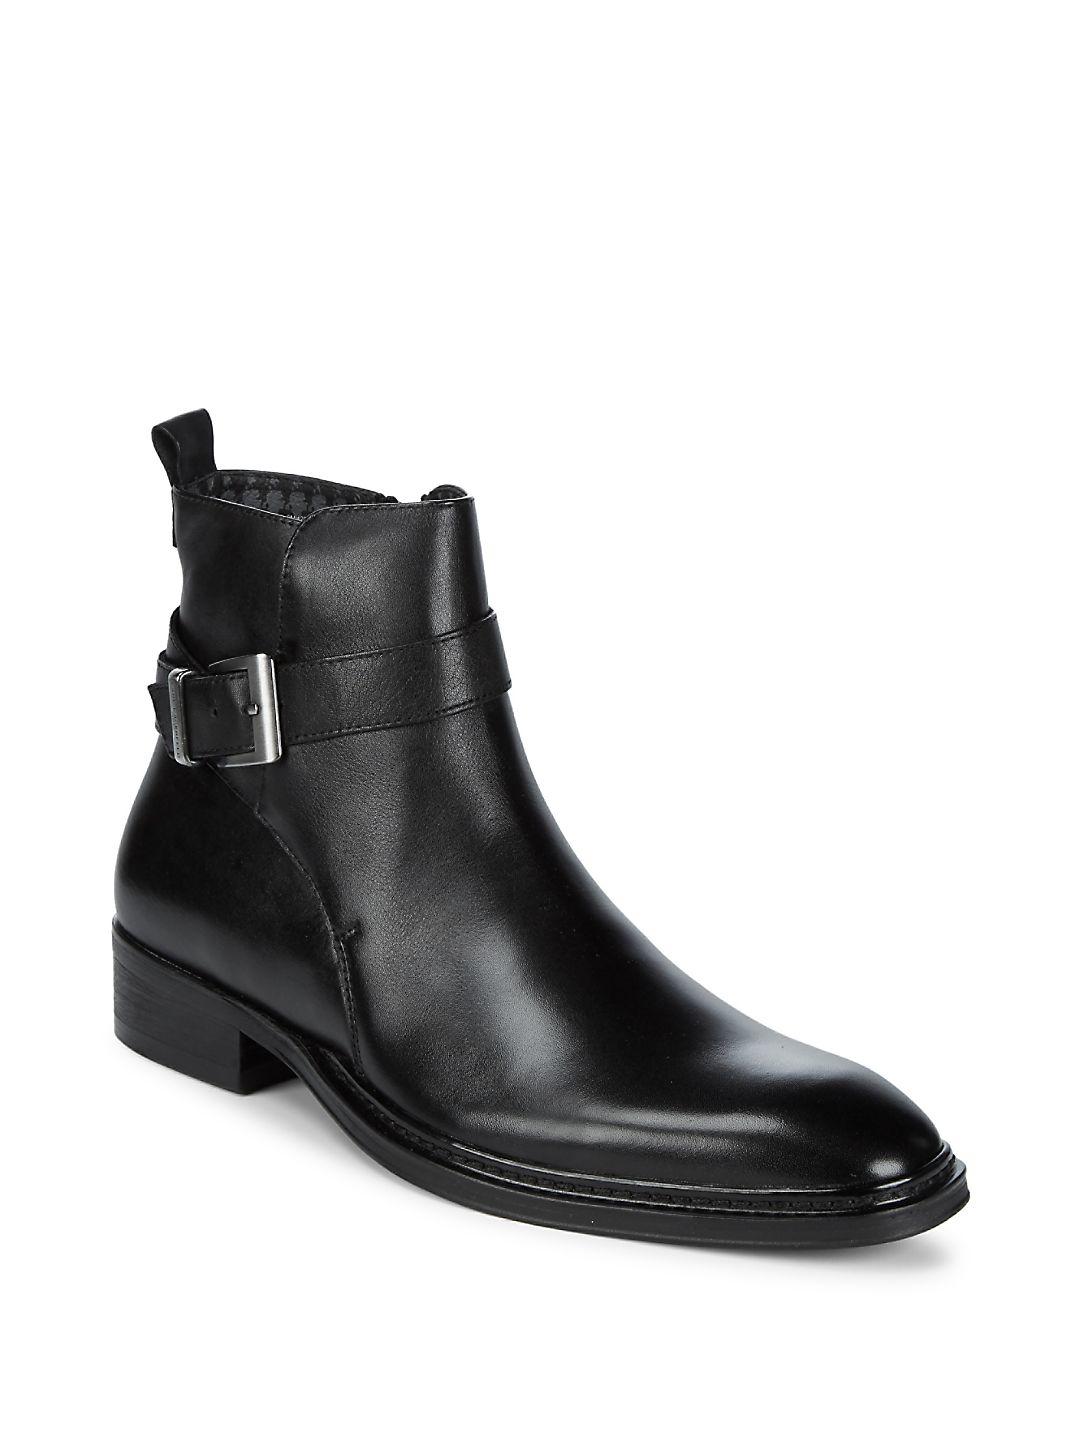 Karl Lagerfeld Chelsea Leather Boots in Cognac (Black) for Men | Lyst